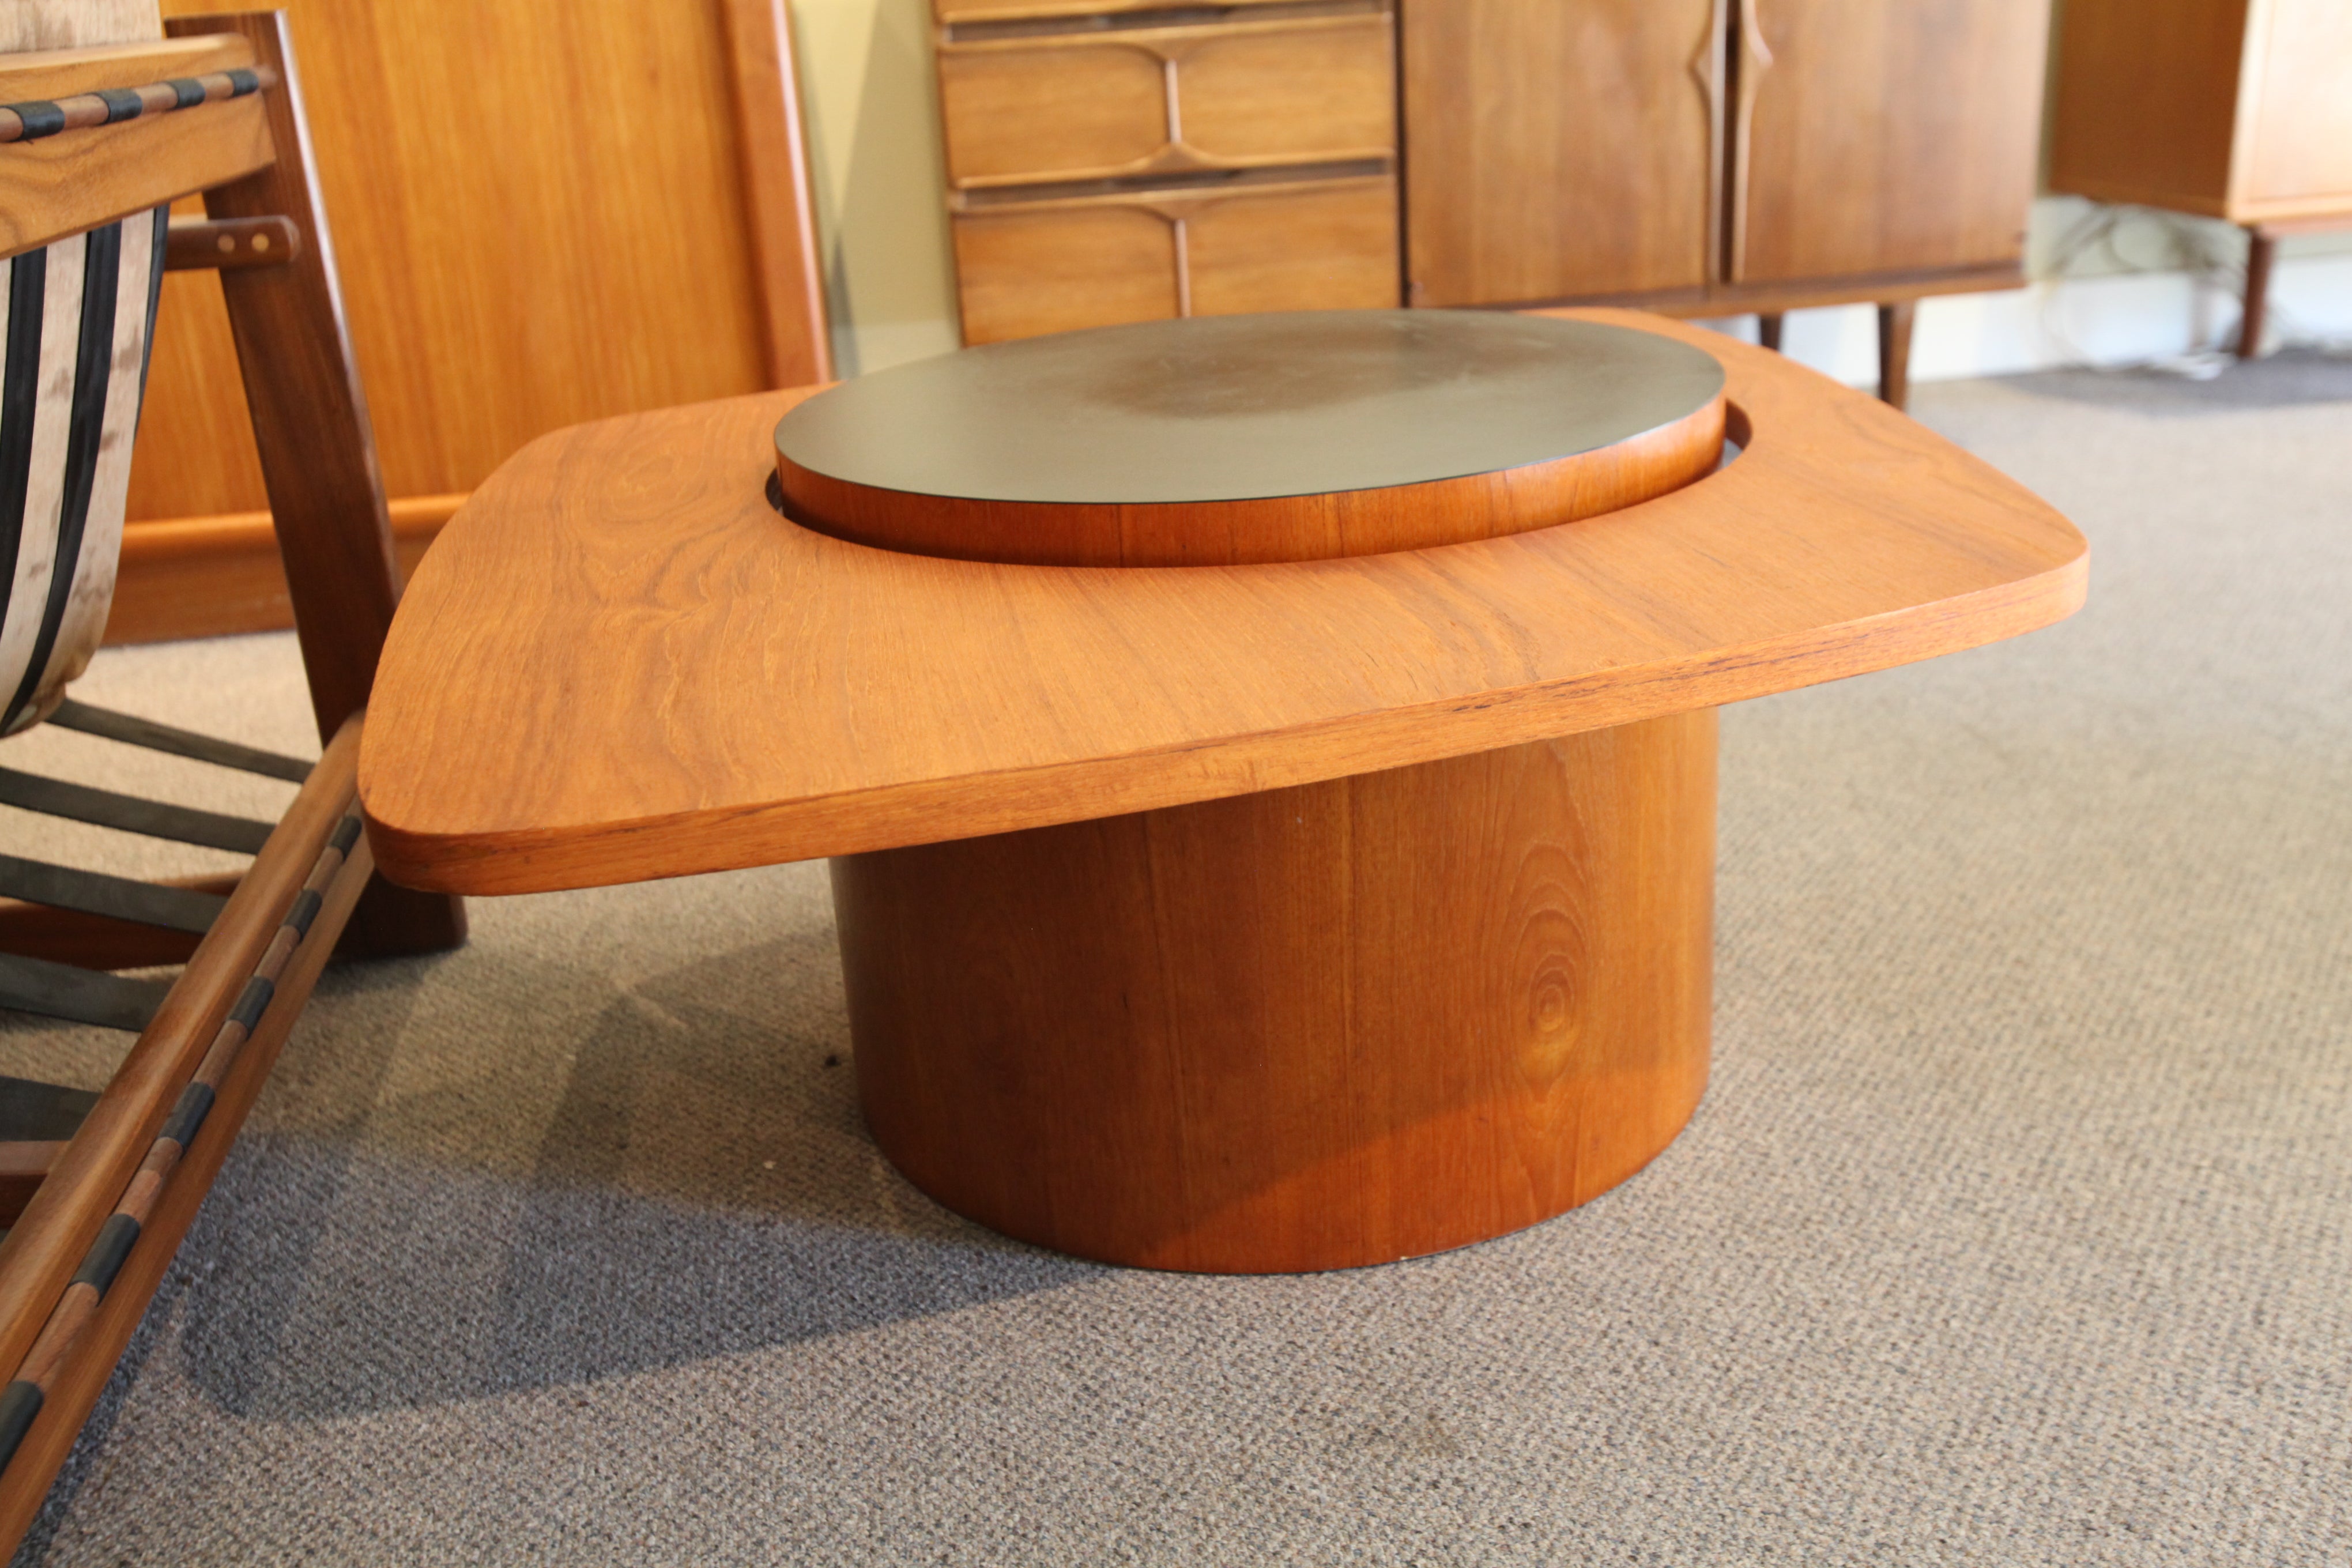 Larger Floating Teak Side Table by RS Associates (31" x 32" x 16"H)